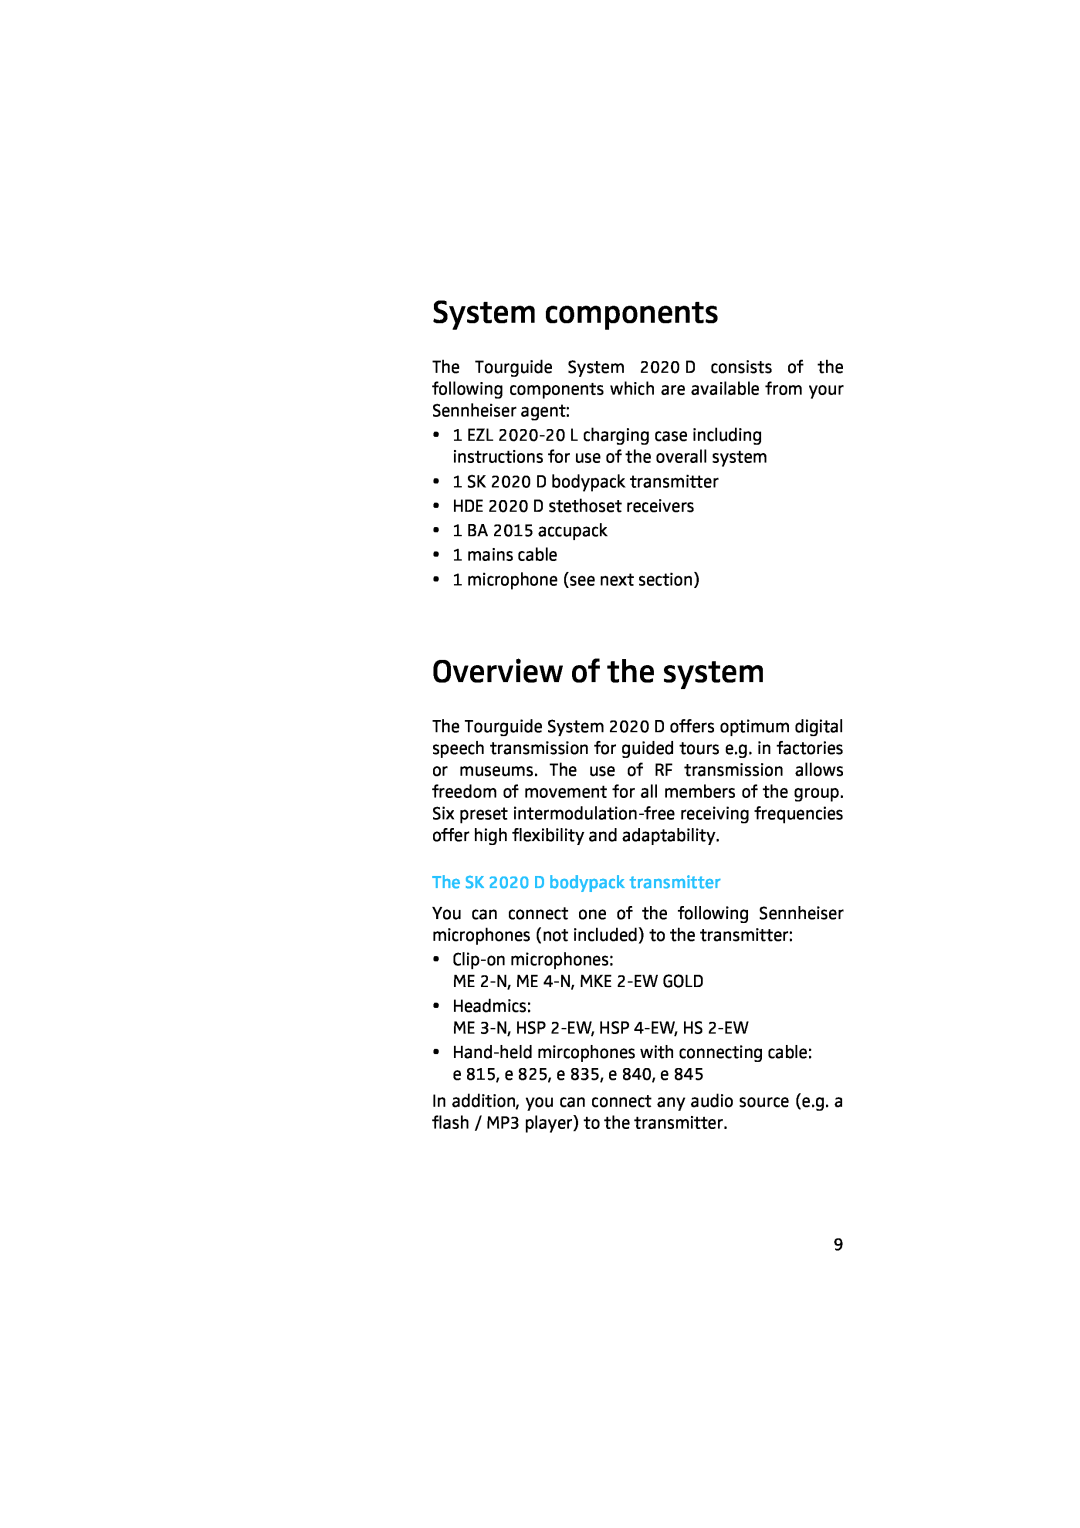 Sennheiser 2020 manual System components, Overview of the system 